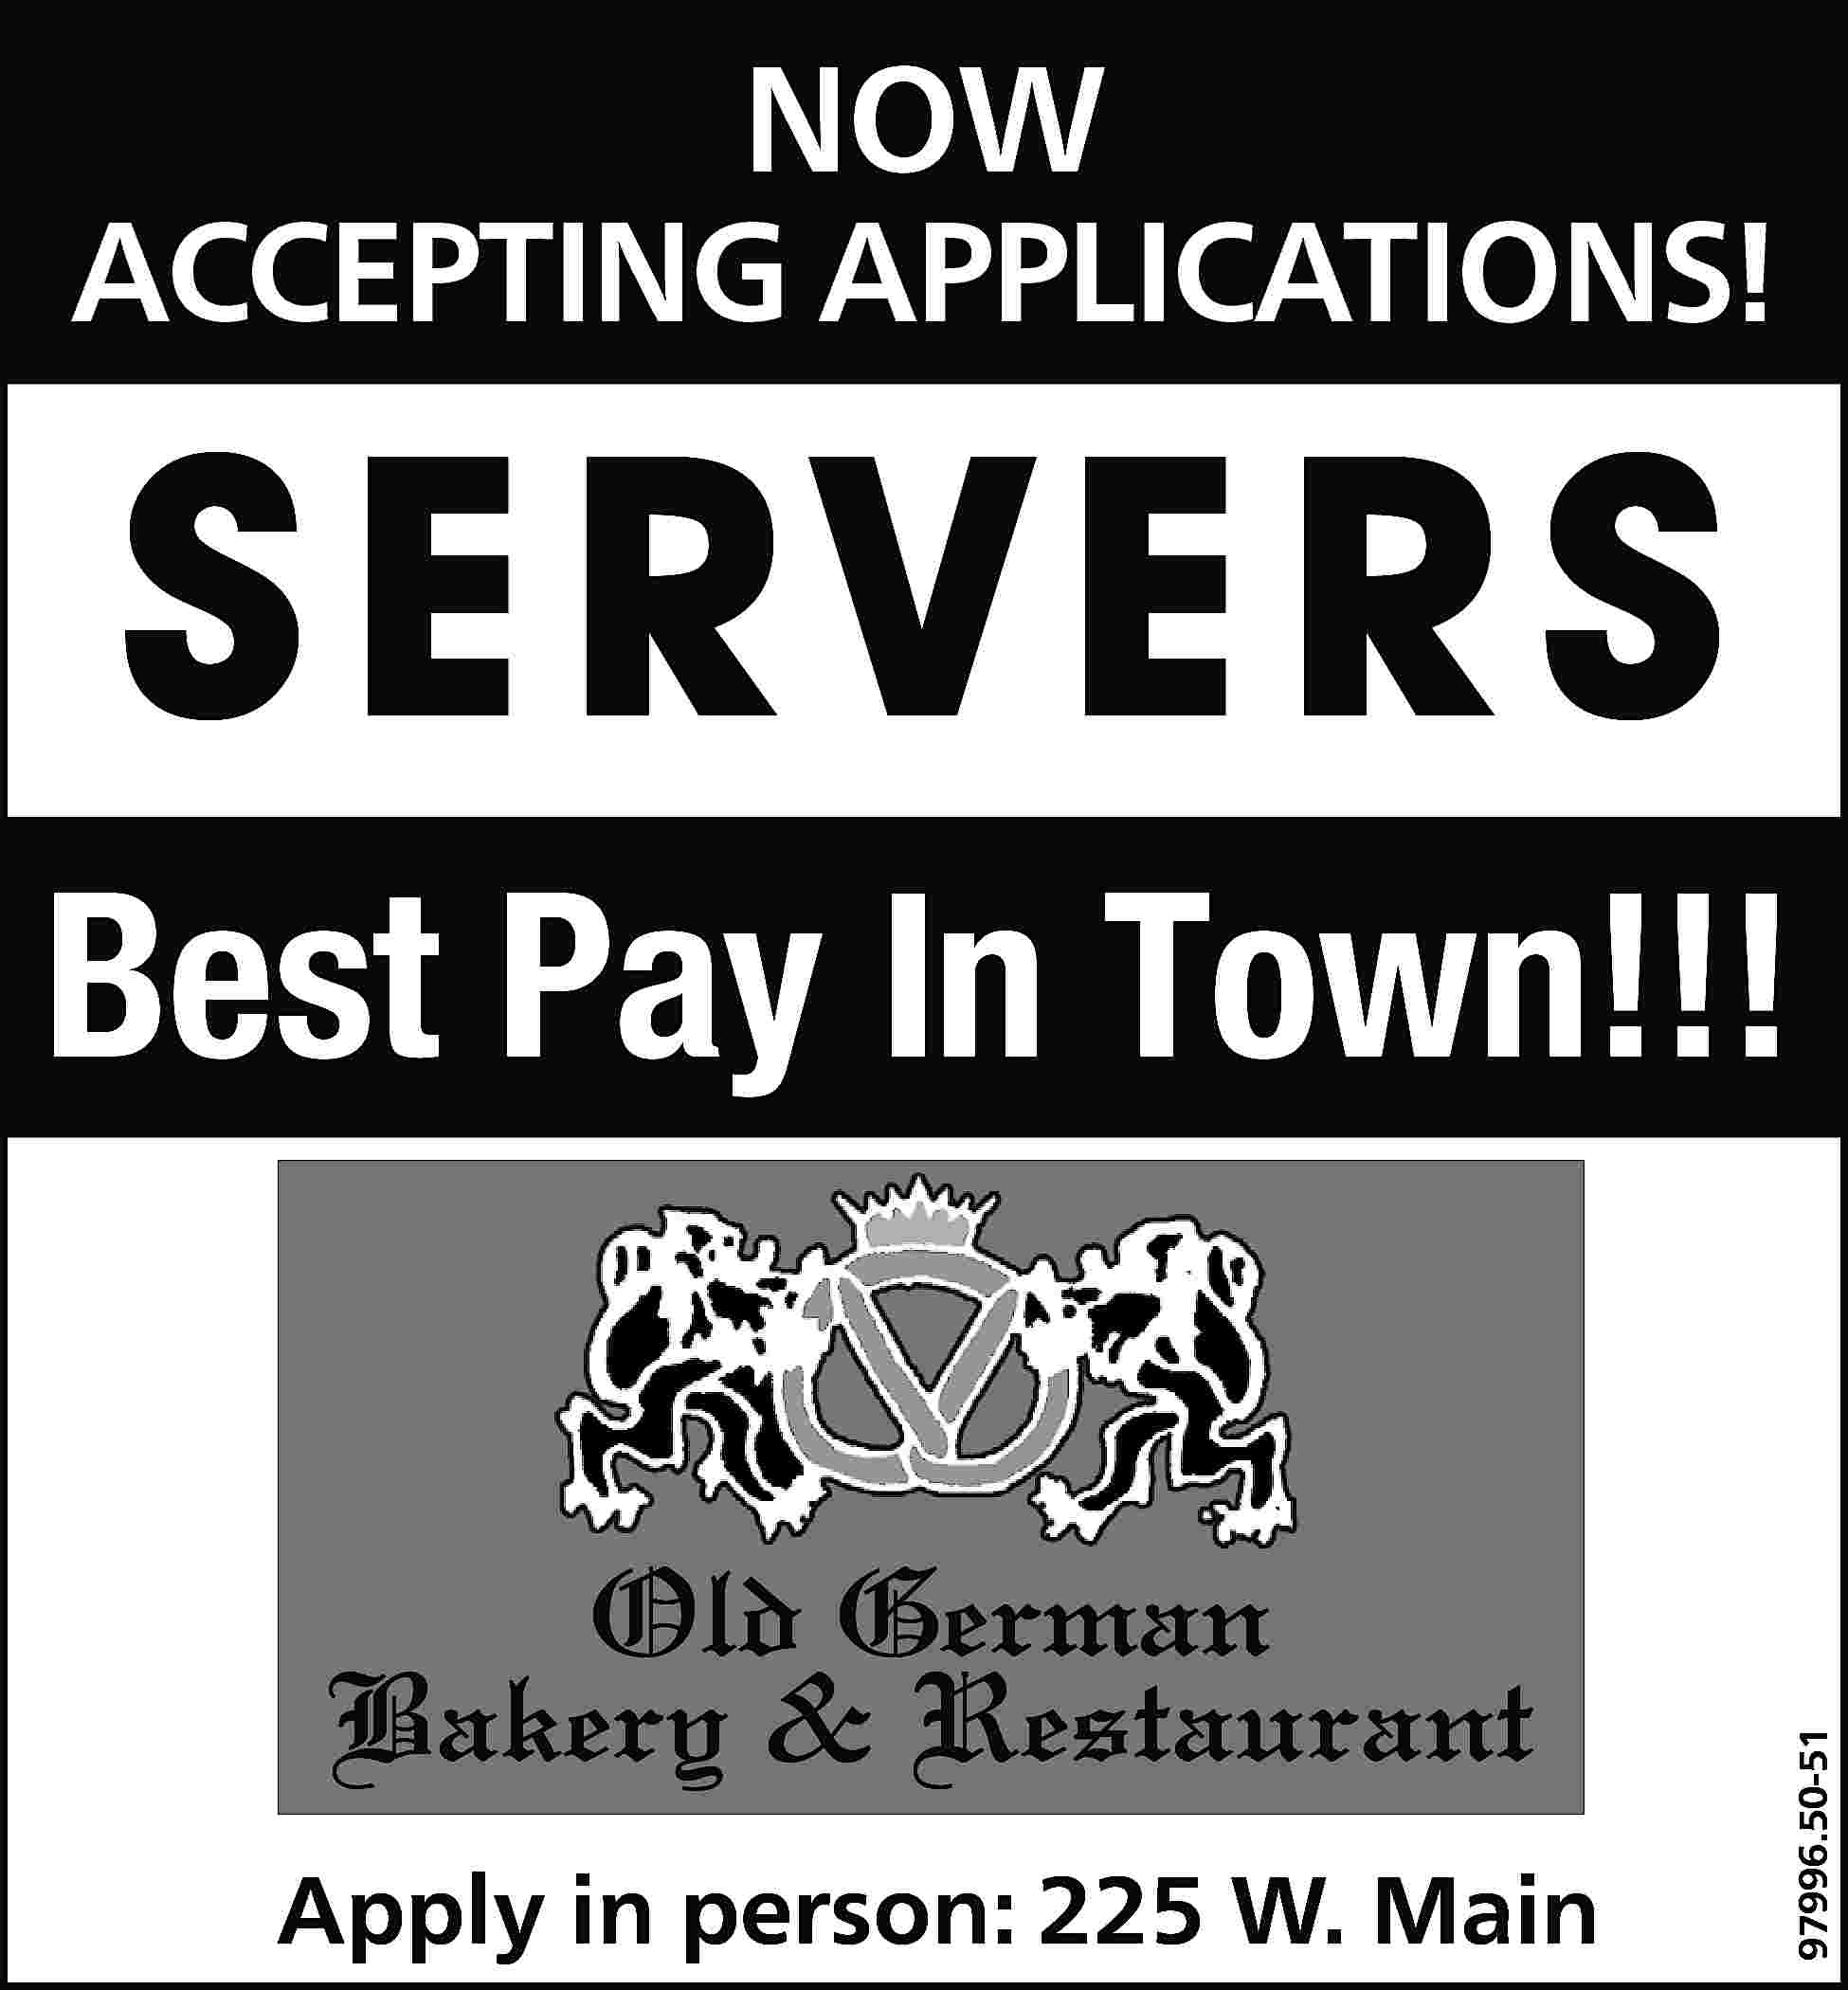 NOW ACCEPTING APPLICATIONS! S E  NOW ACCEPTING APPLICATIONS! S E RV E RS Old German Bakery & Restaurant Apply in person: 225 W. Main 97996.50-51 Best Pay In Town!!!